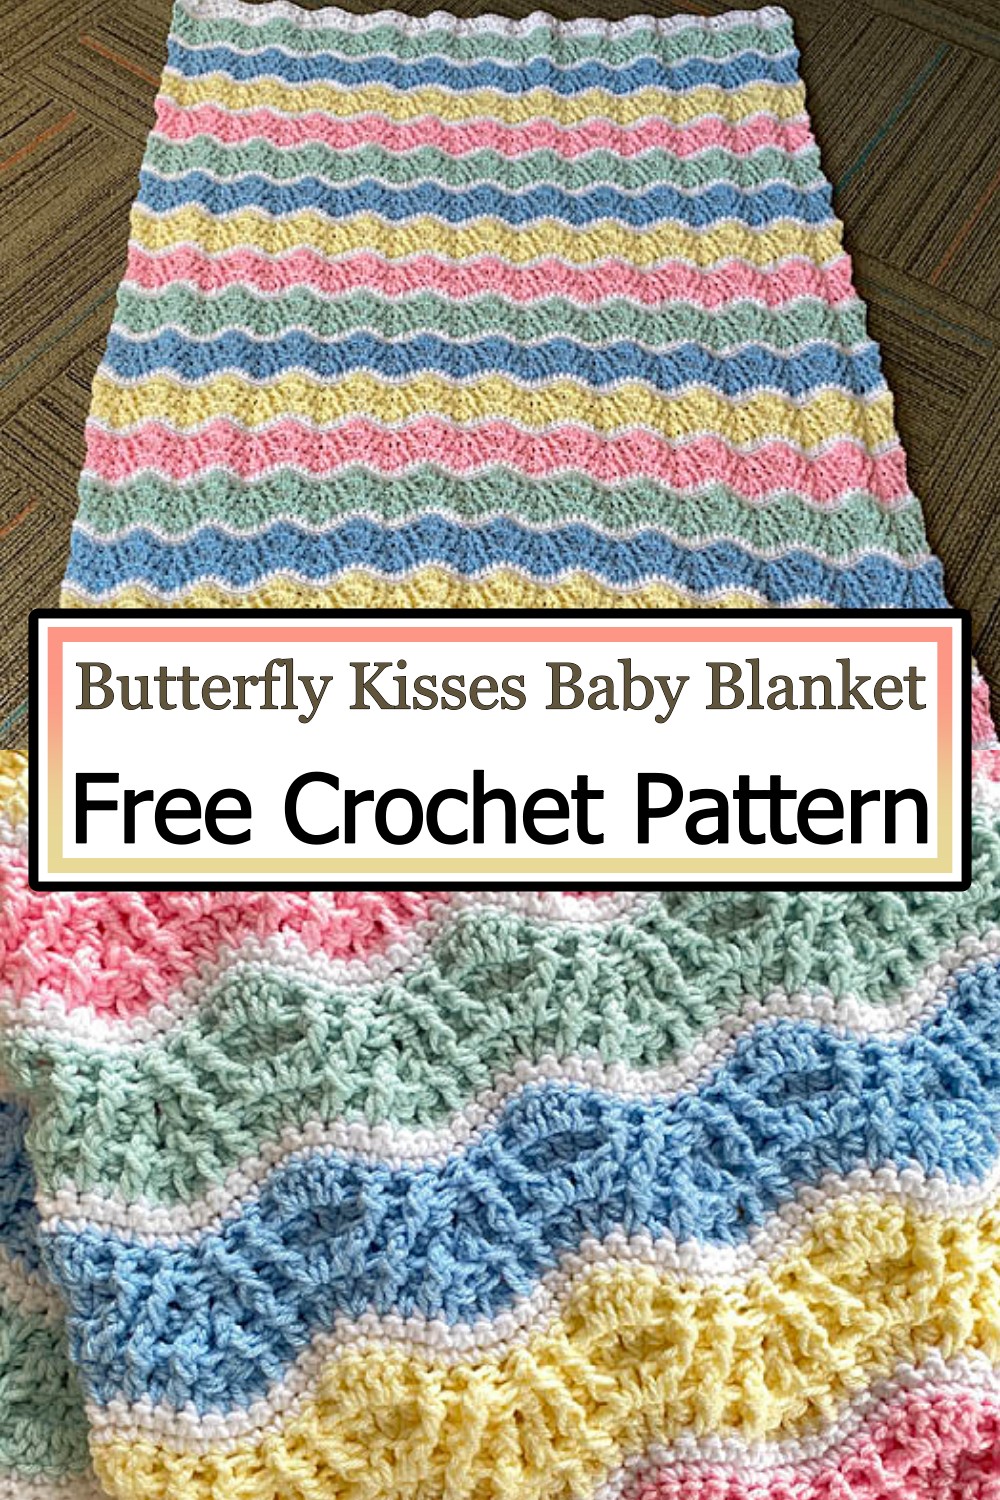 Butterfly Kisses Baby Blanket